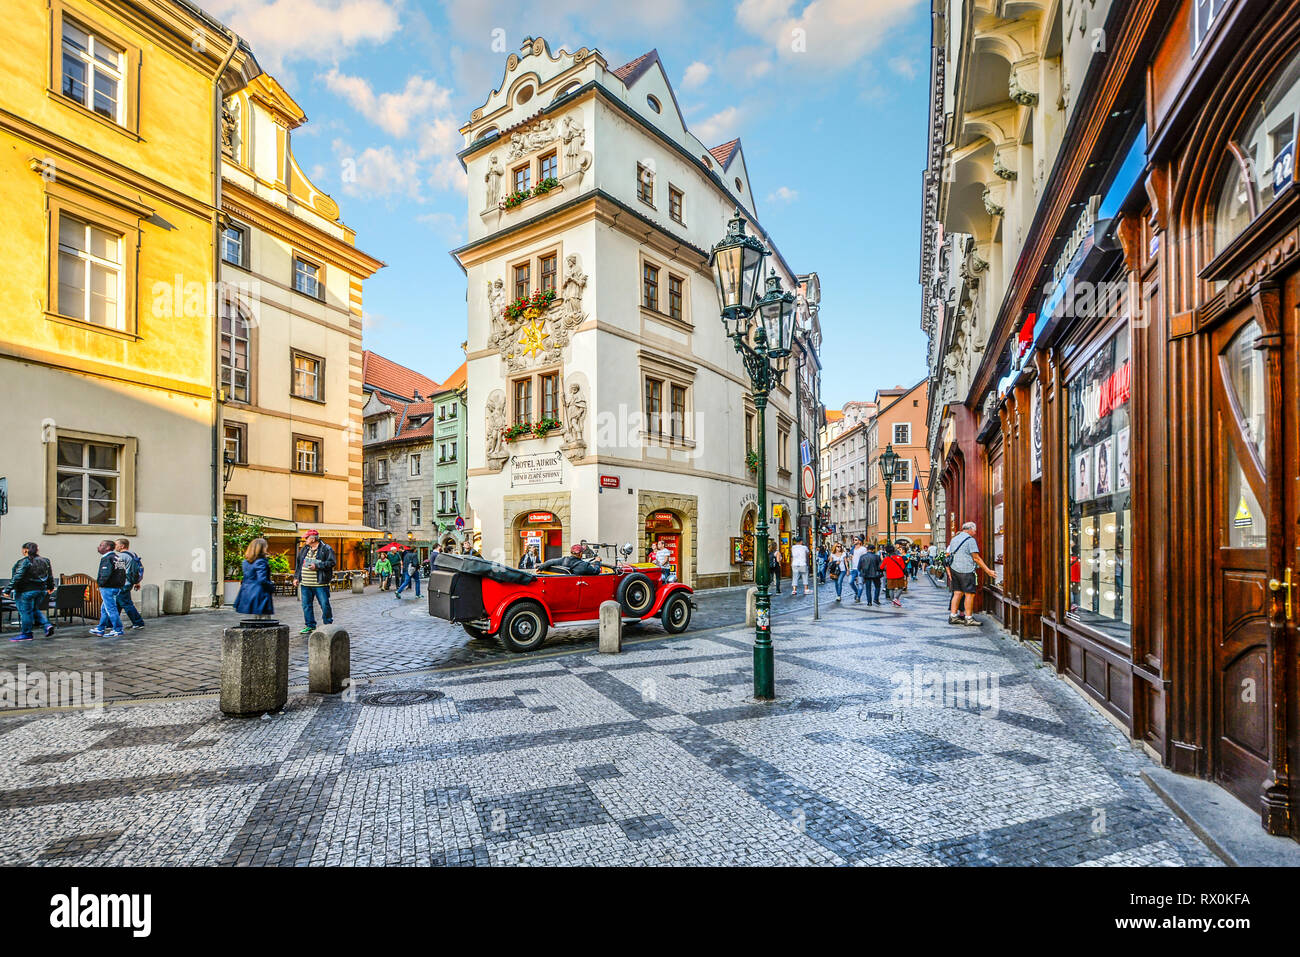 Tourists sightsee, shop and enjoy the cafes as they pass by a vintage red  automobile in a picturesque section of Old Town Prague, Czech Republic  Stock Photo - Alamy